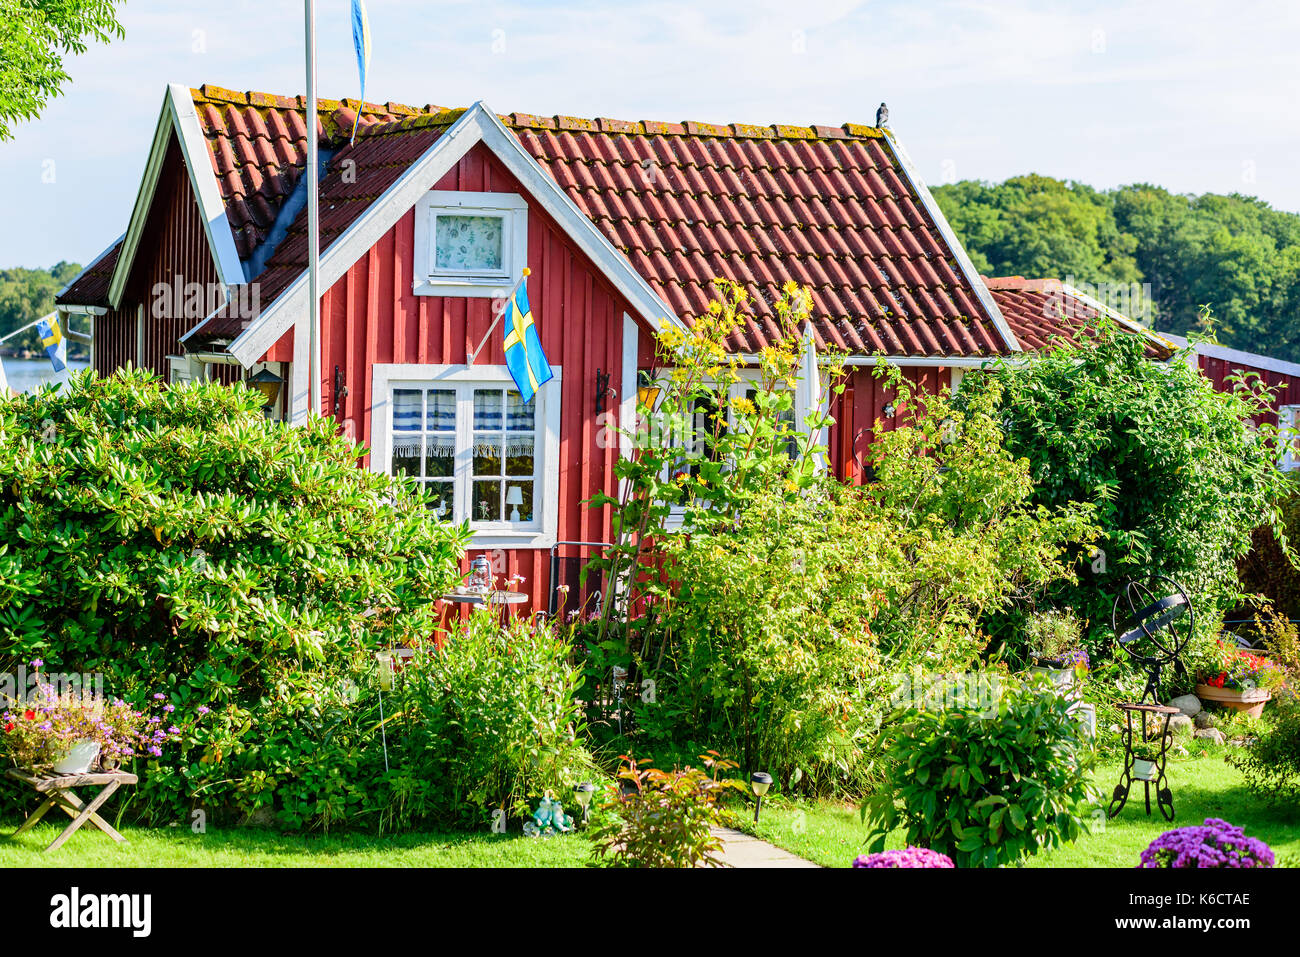 Karlskrona, Sweden - August 28, 2017: Travel documentary of city gardens. Red vintage coastal cabin with flowers and shrubbery in the garden. Stock Photo